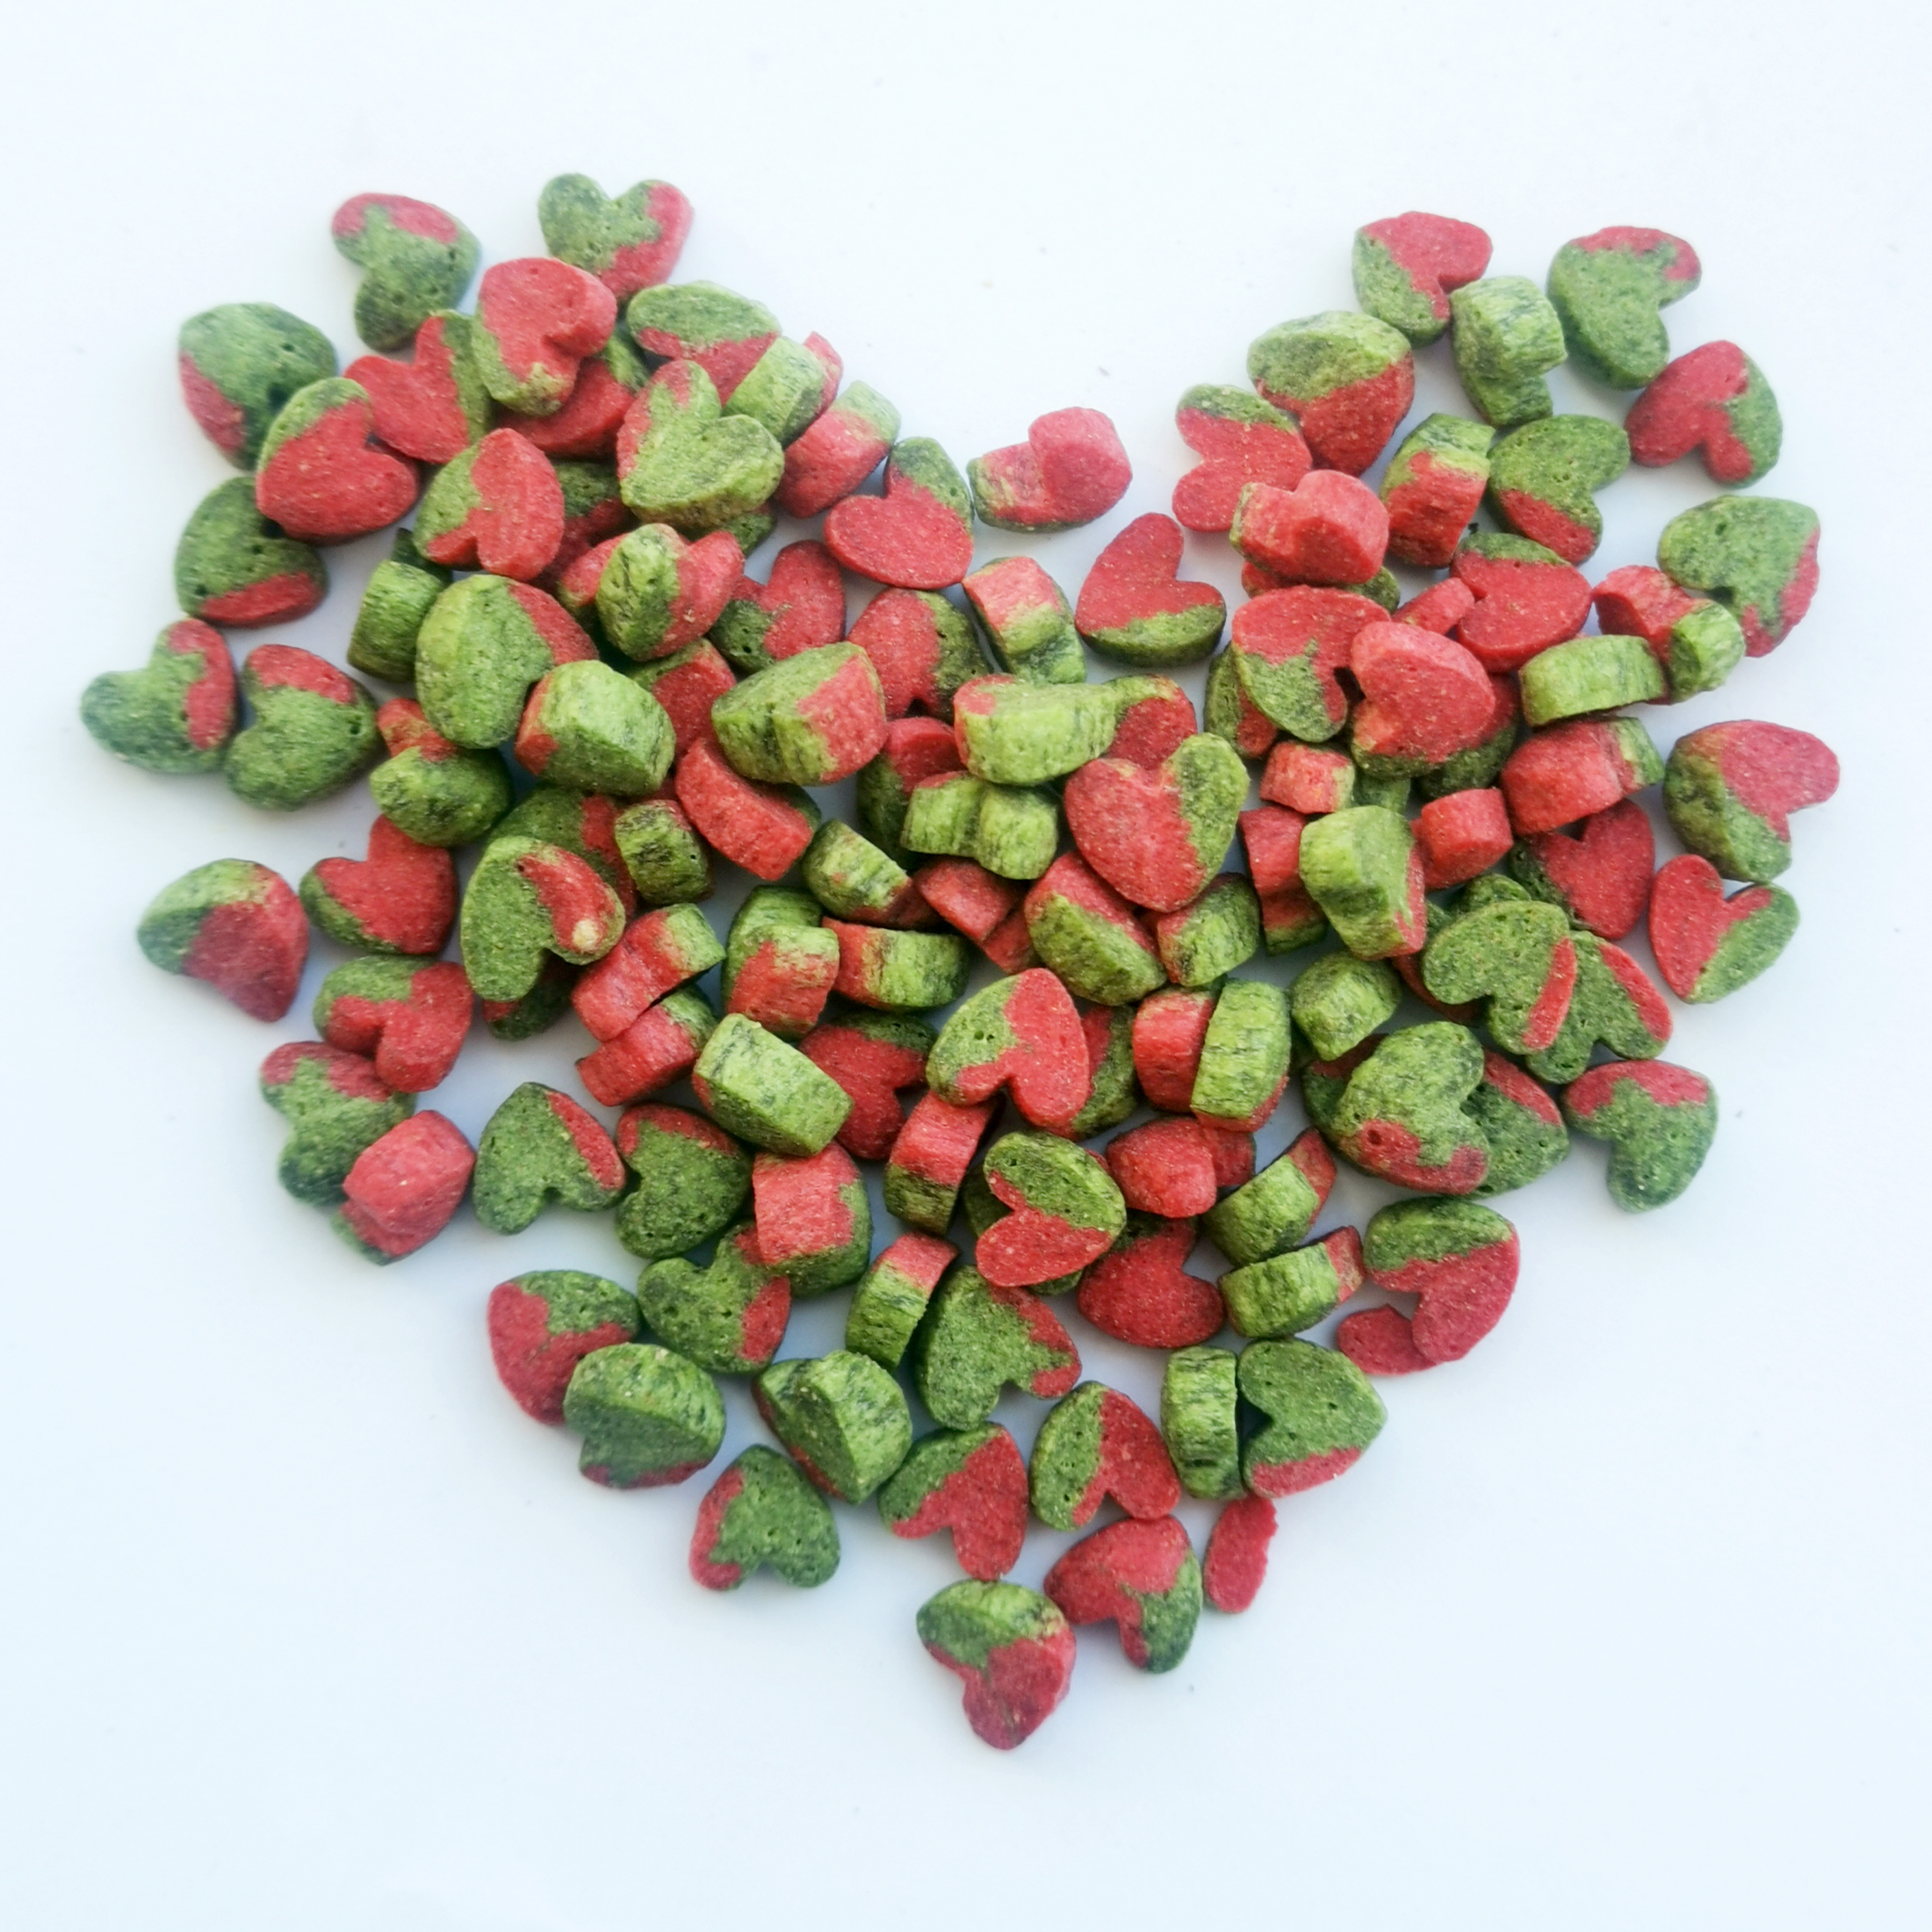 Two-color catnip (heart-shaped)